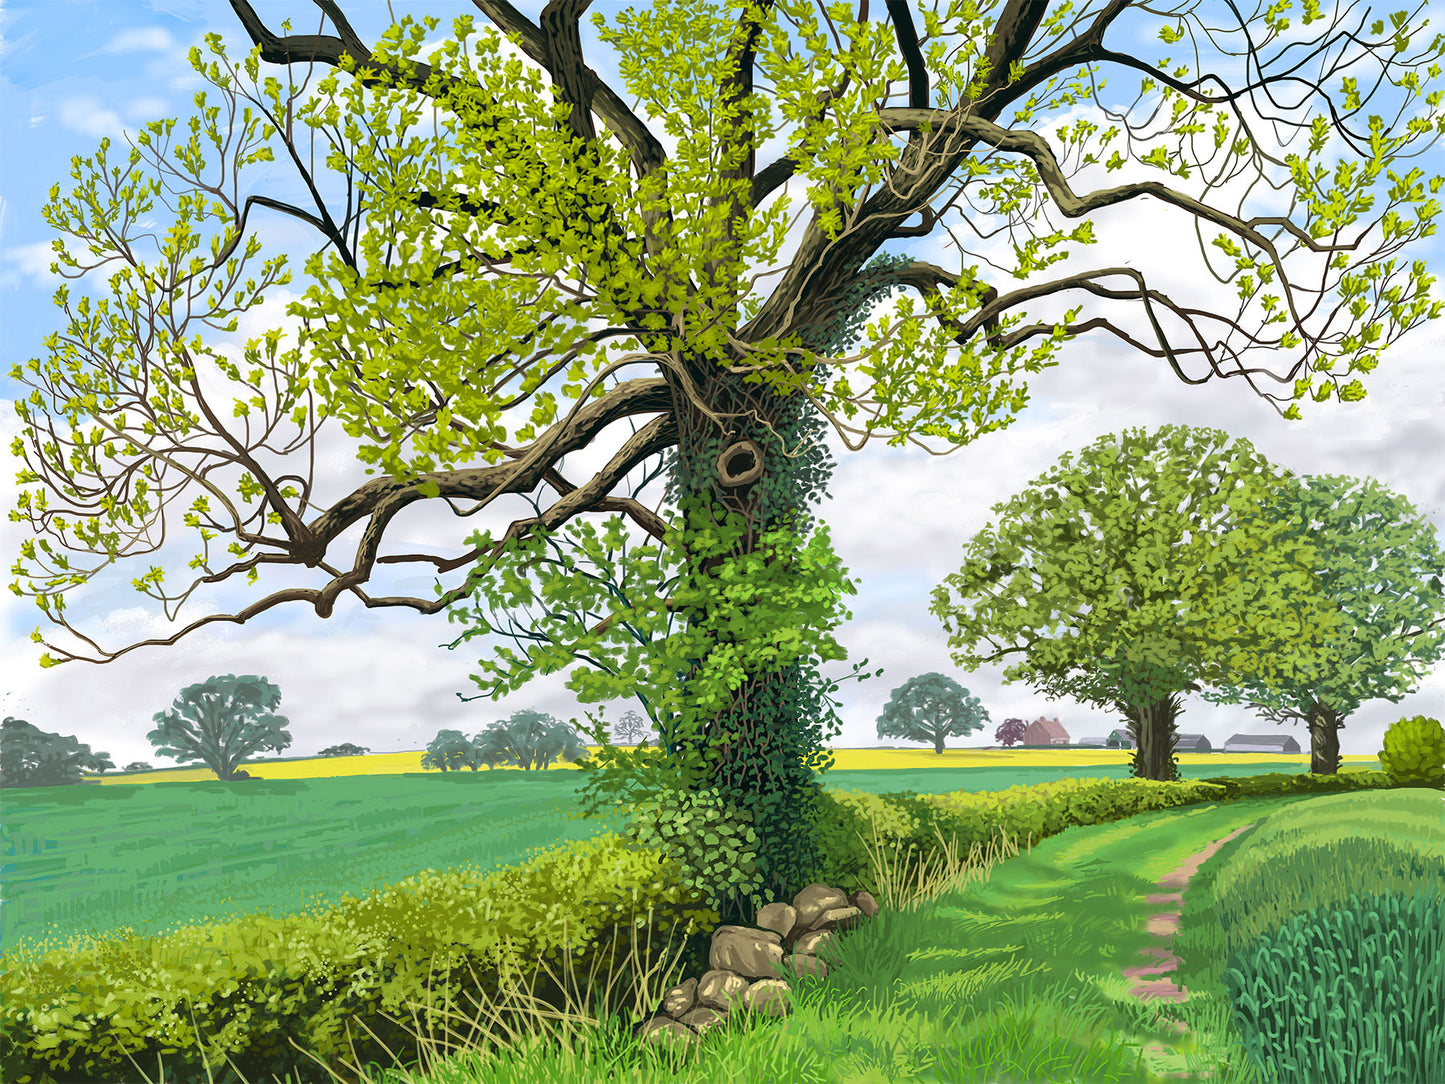 May tree, Farlington. iPad digital drawing by Jeff Parker available in 2 print editions